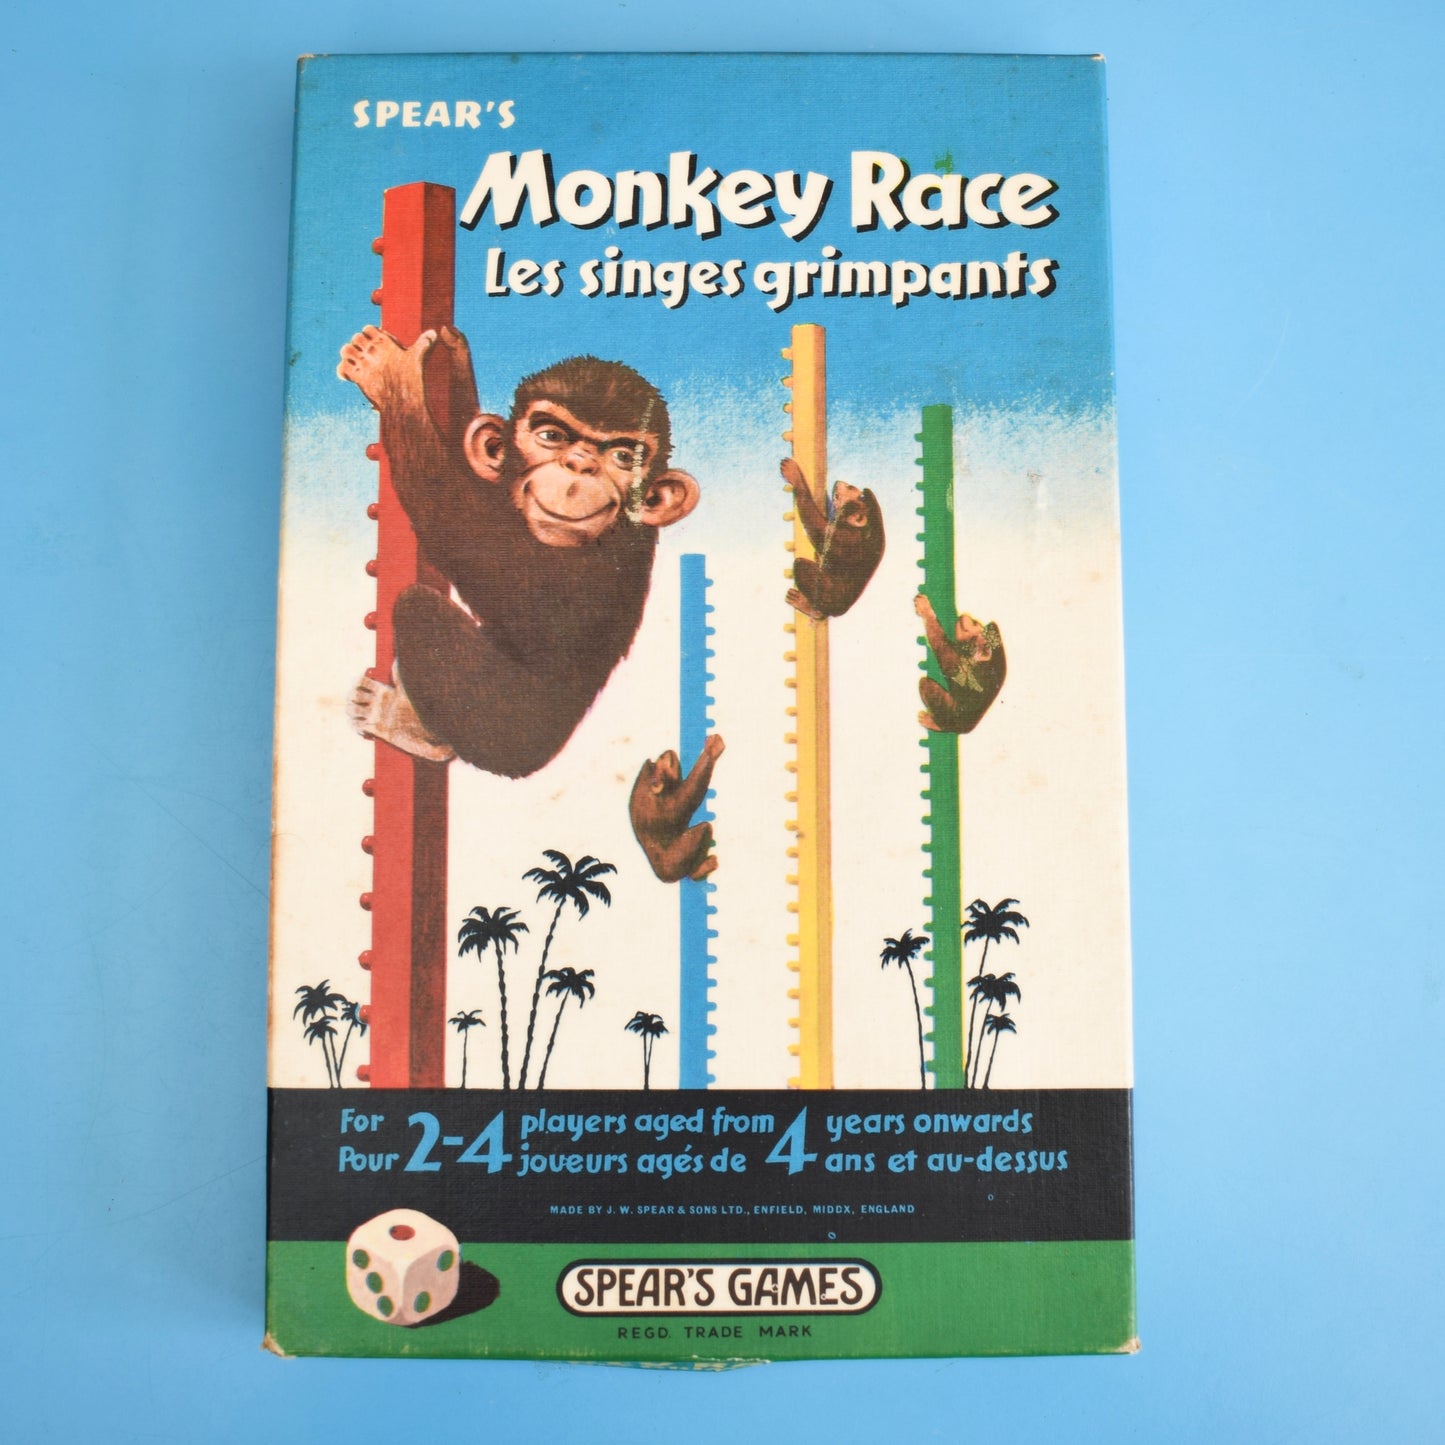 Vintage 1970s Spears Game - Monkey Race